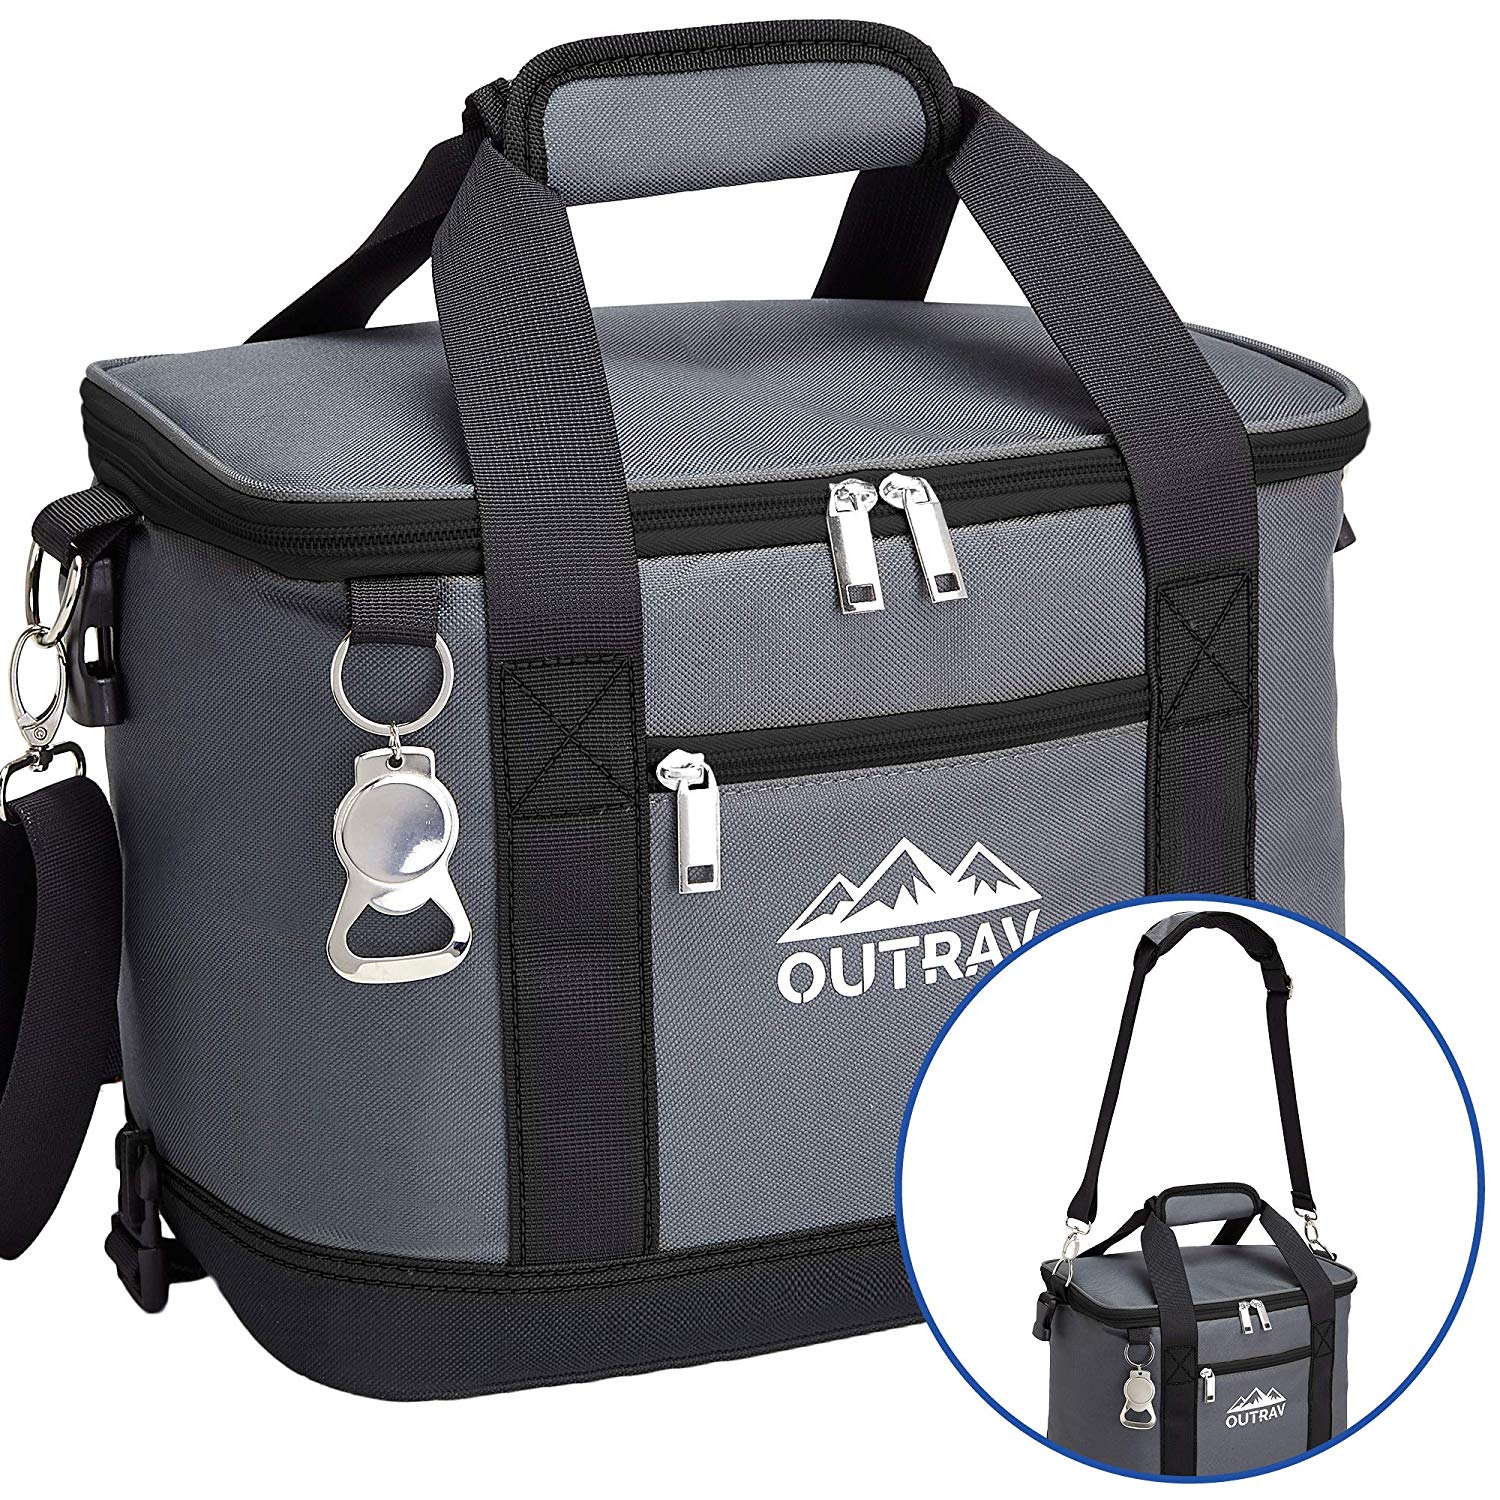 Cool-it Insulated Cooler Bag